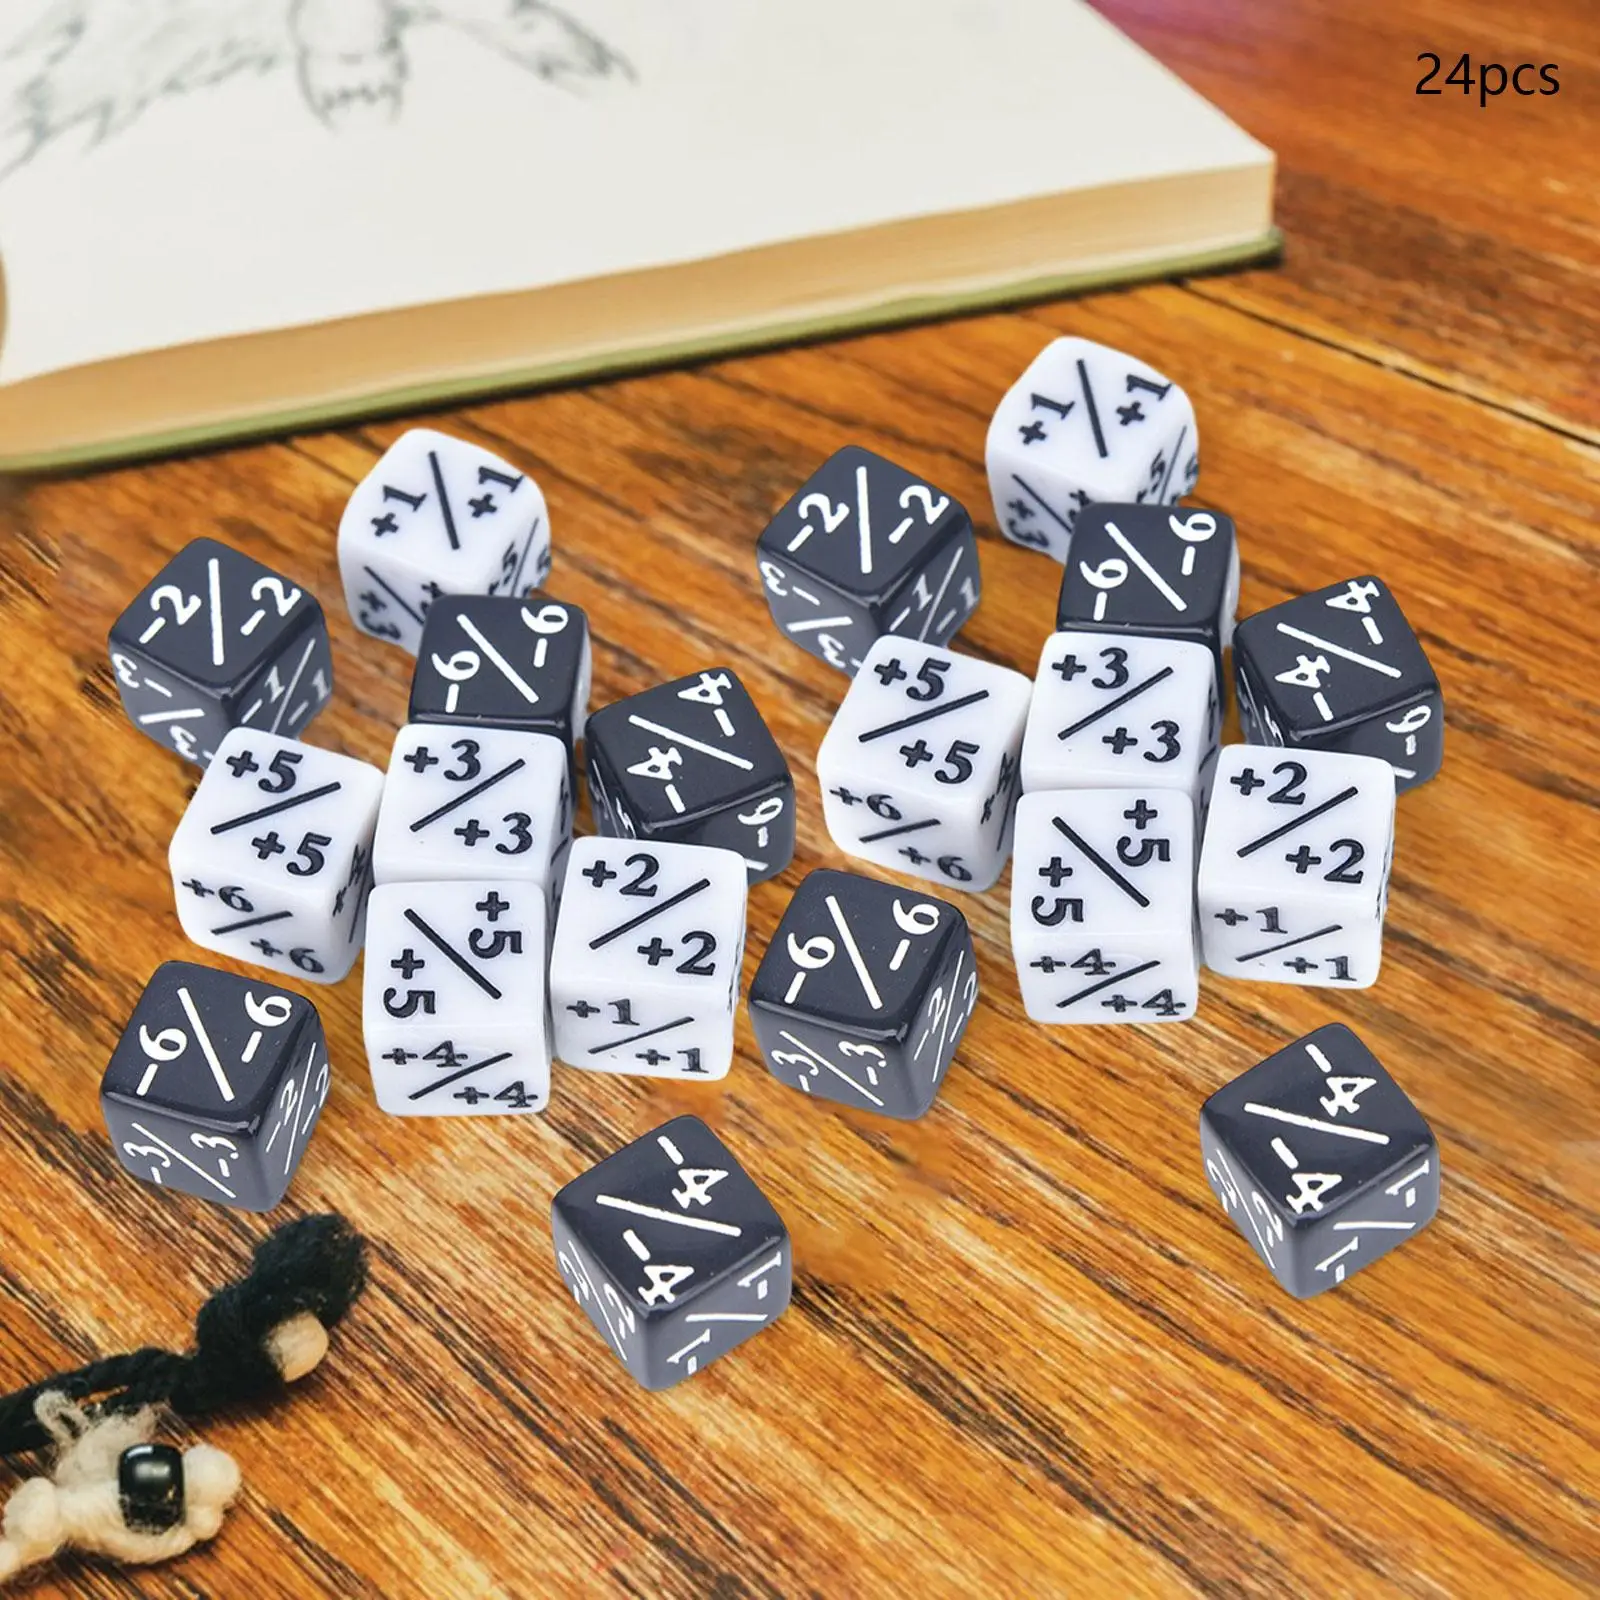 24 Pieces Counter Token Dice Acrylic Math Teaching for Party Favors Tabletop